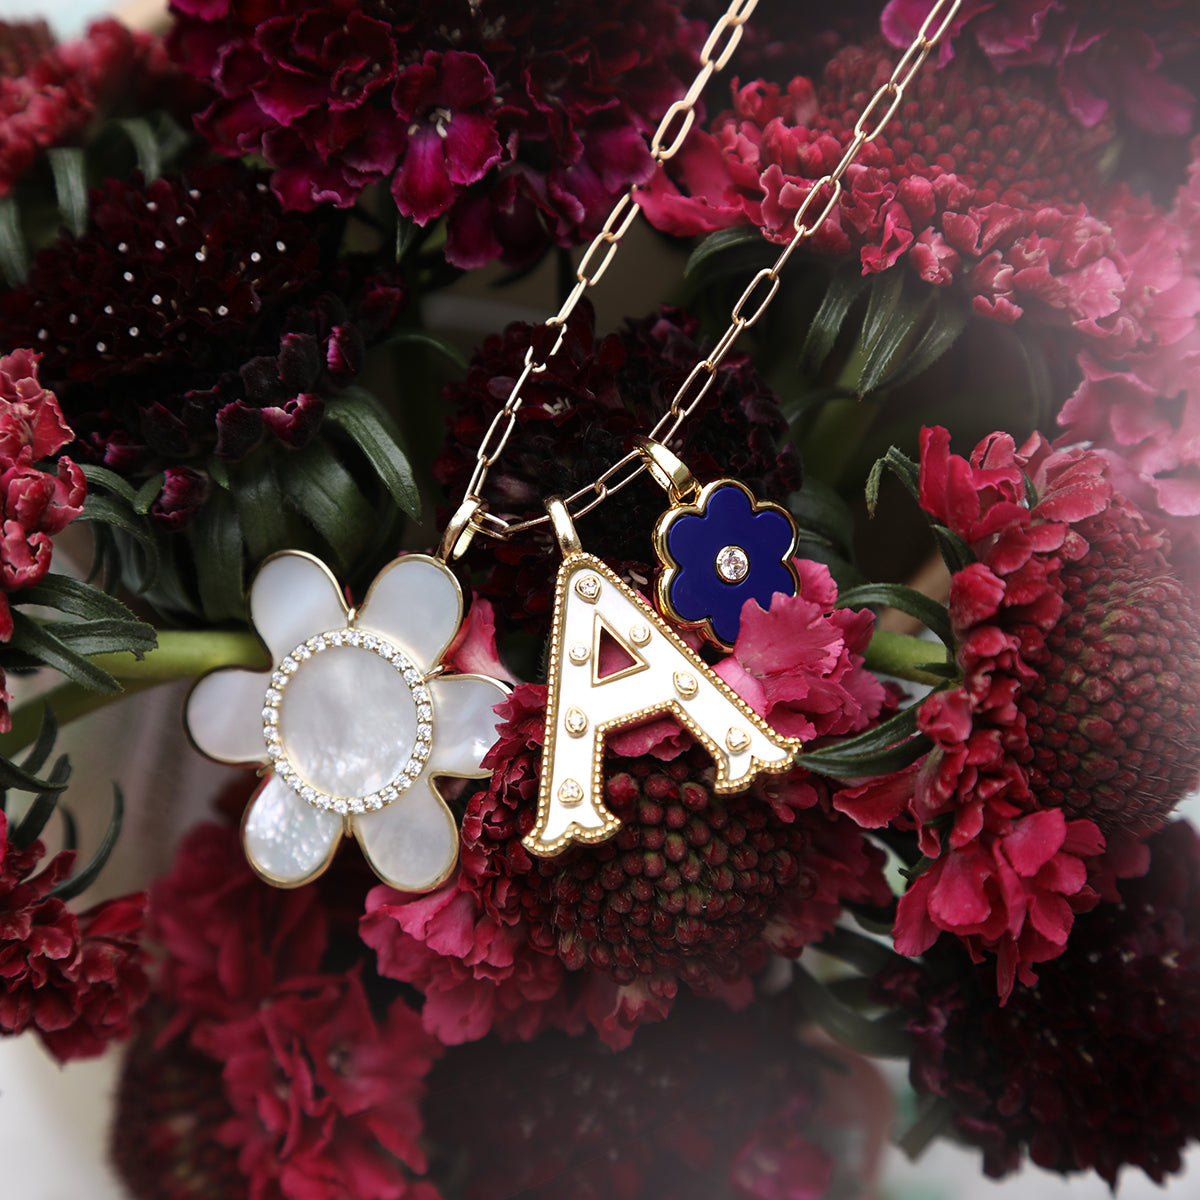 Beaded Border Iron-On LOVE LETTERS